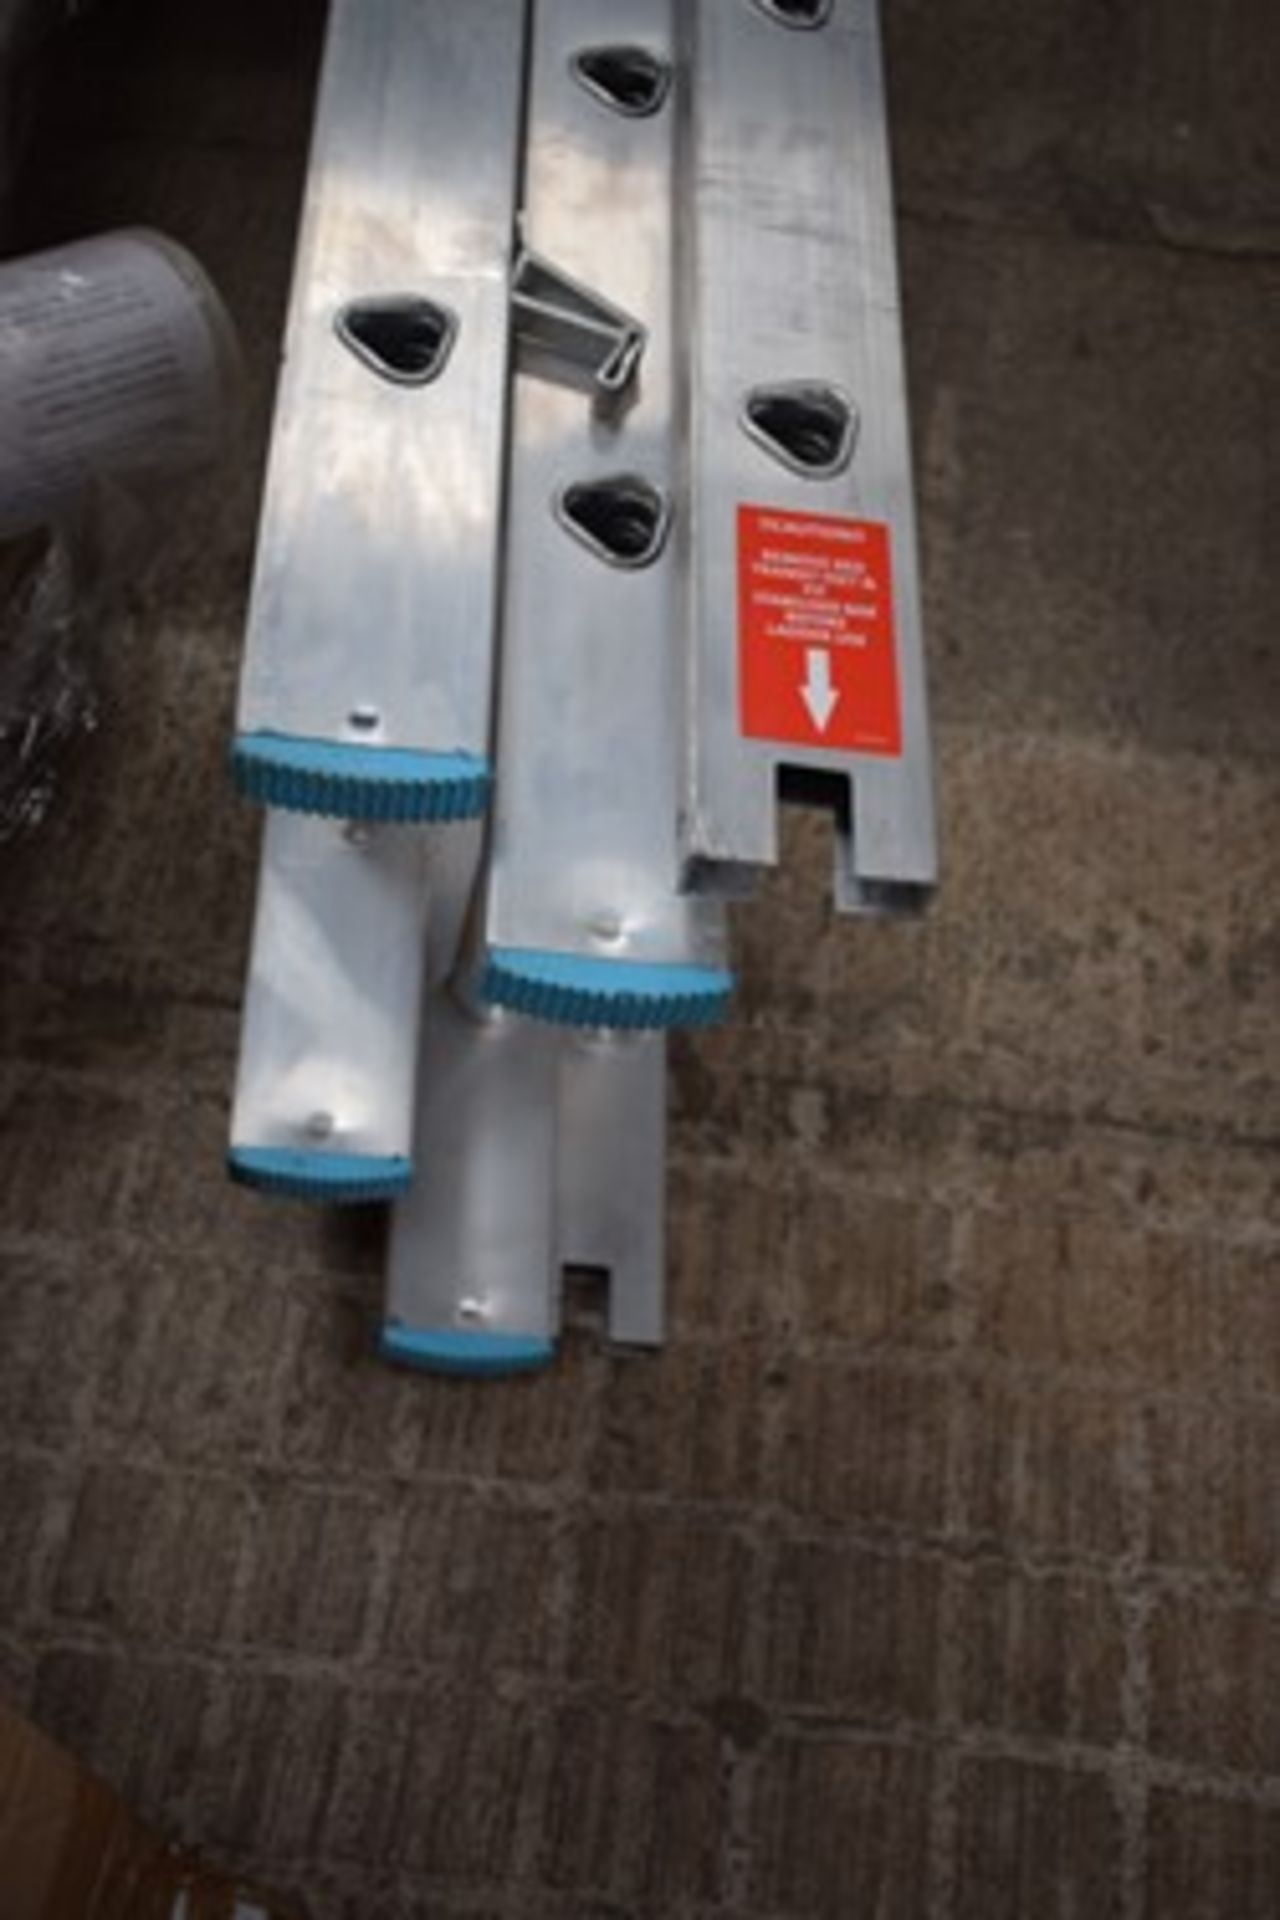 1 x TB Davies 2.5-5.0m Taskmaster tripe extension ladder, SKU:- 1102-037, missing 3 caps and some - Image 2 of 3